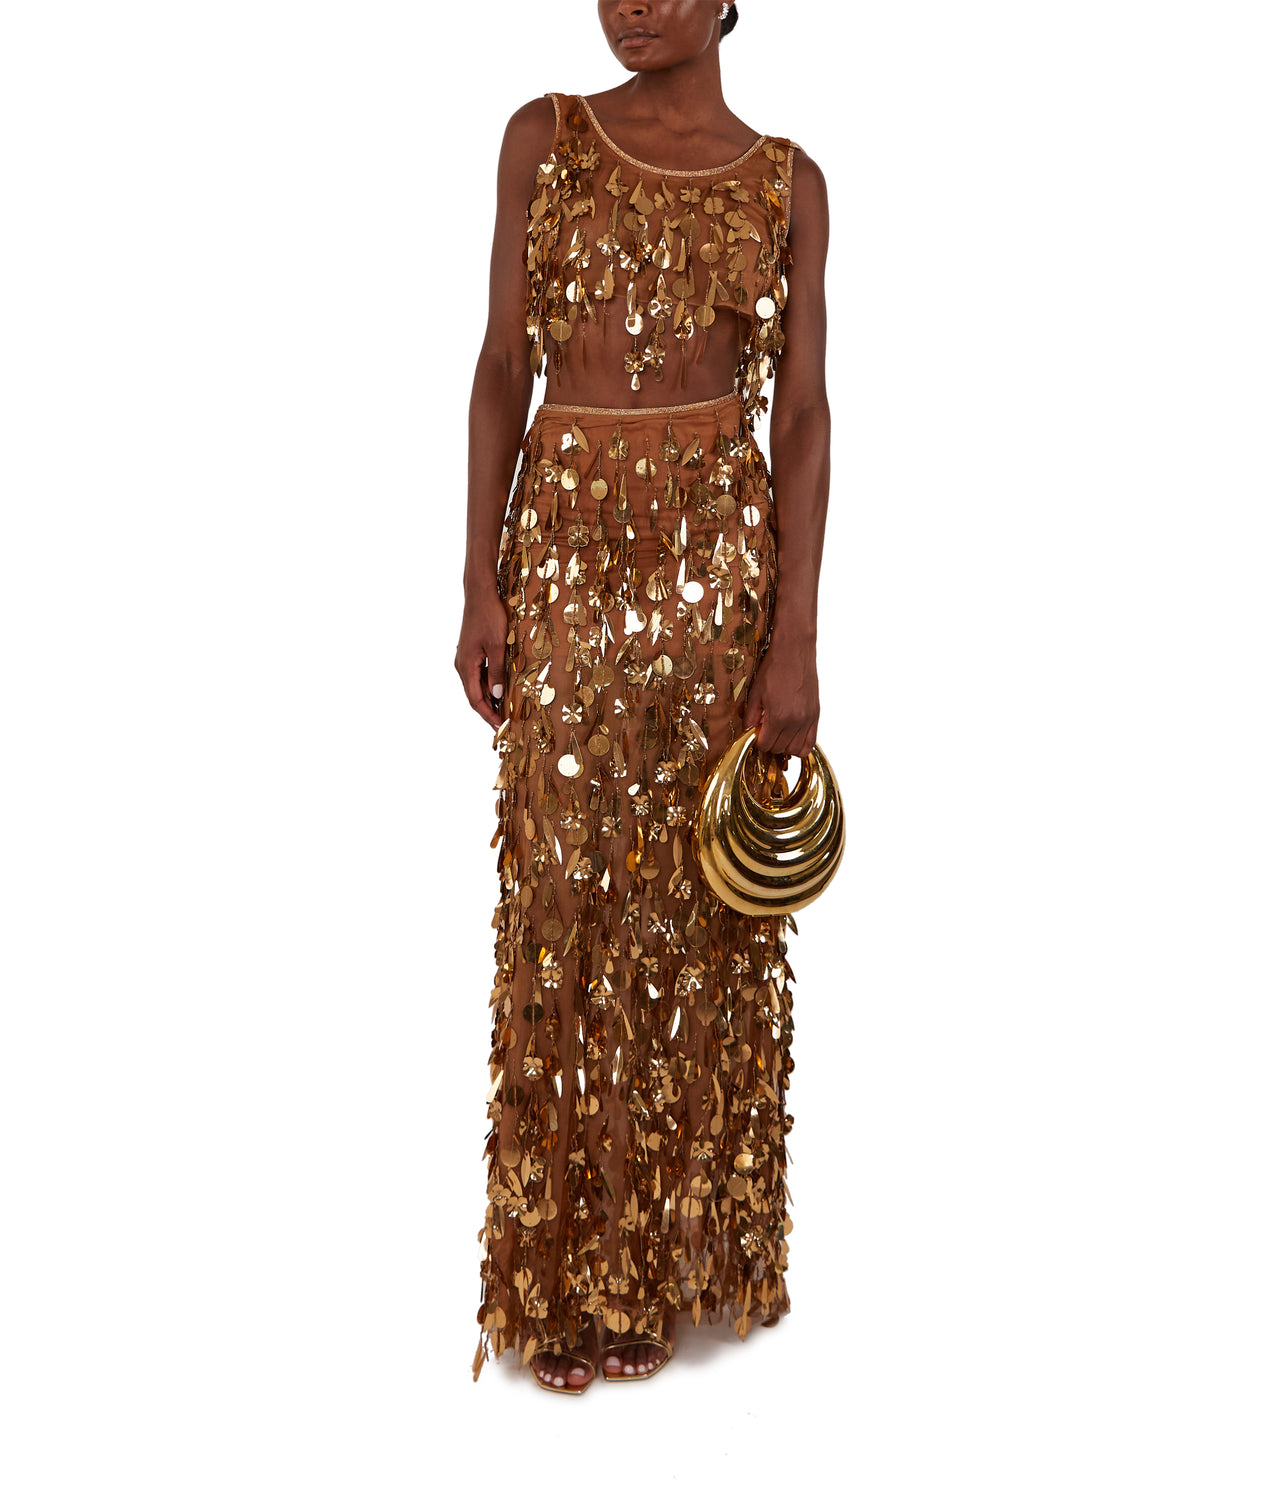 Prunella Bronze Beaded Tulle Maxi Skirt With Dripping Gold Sequin And Embroidery Details